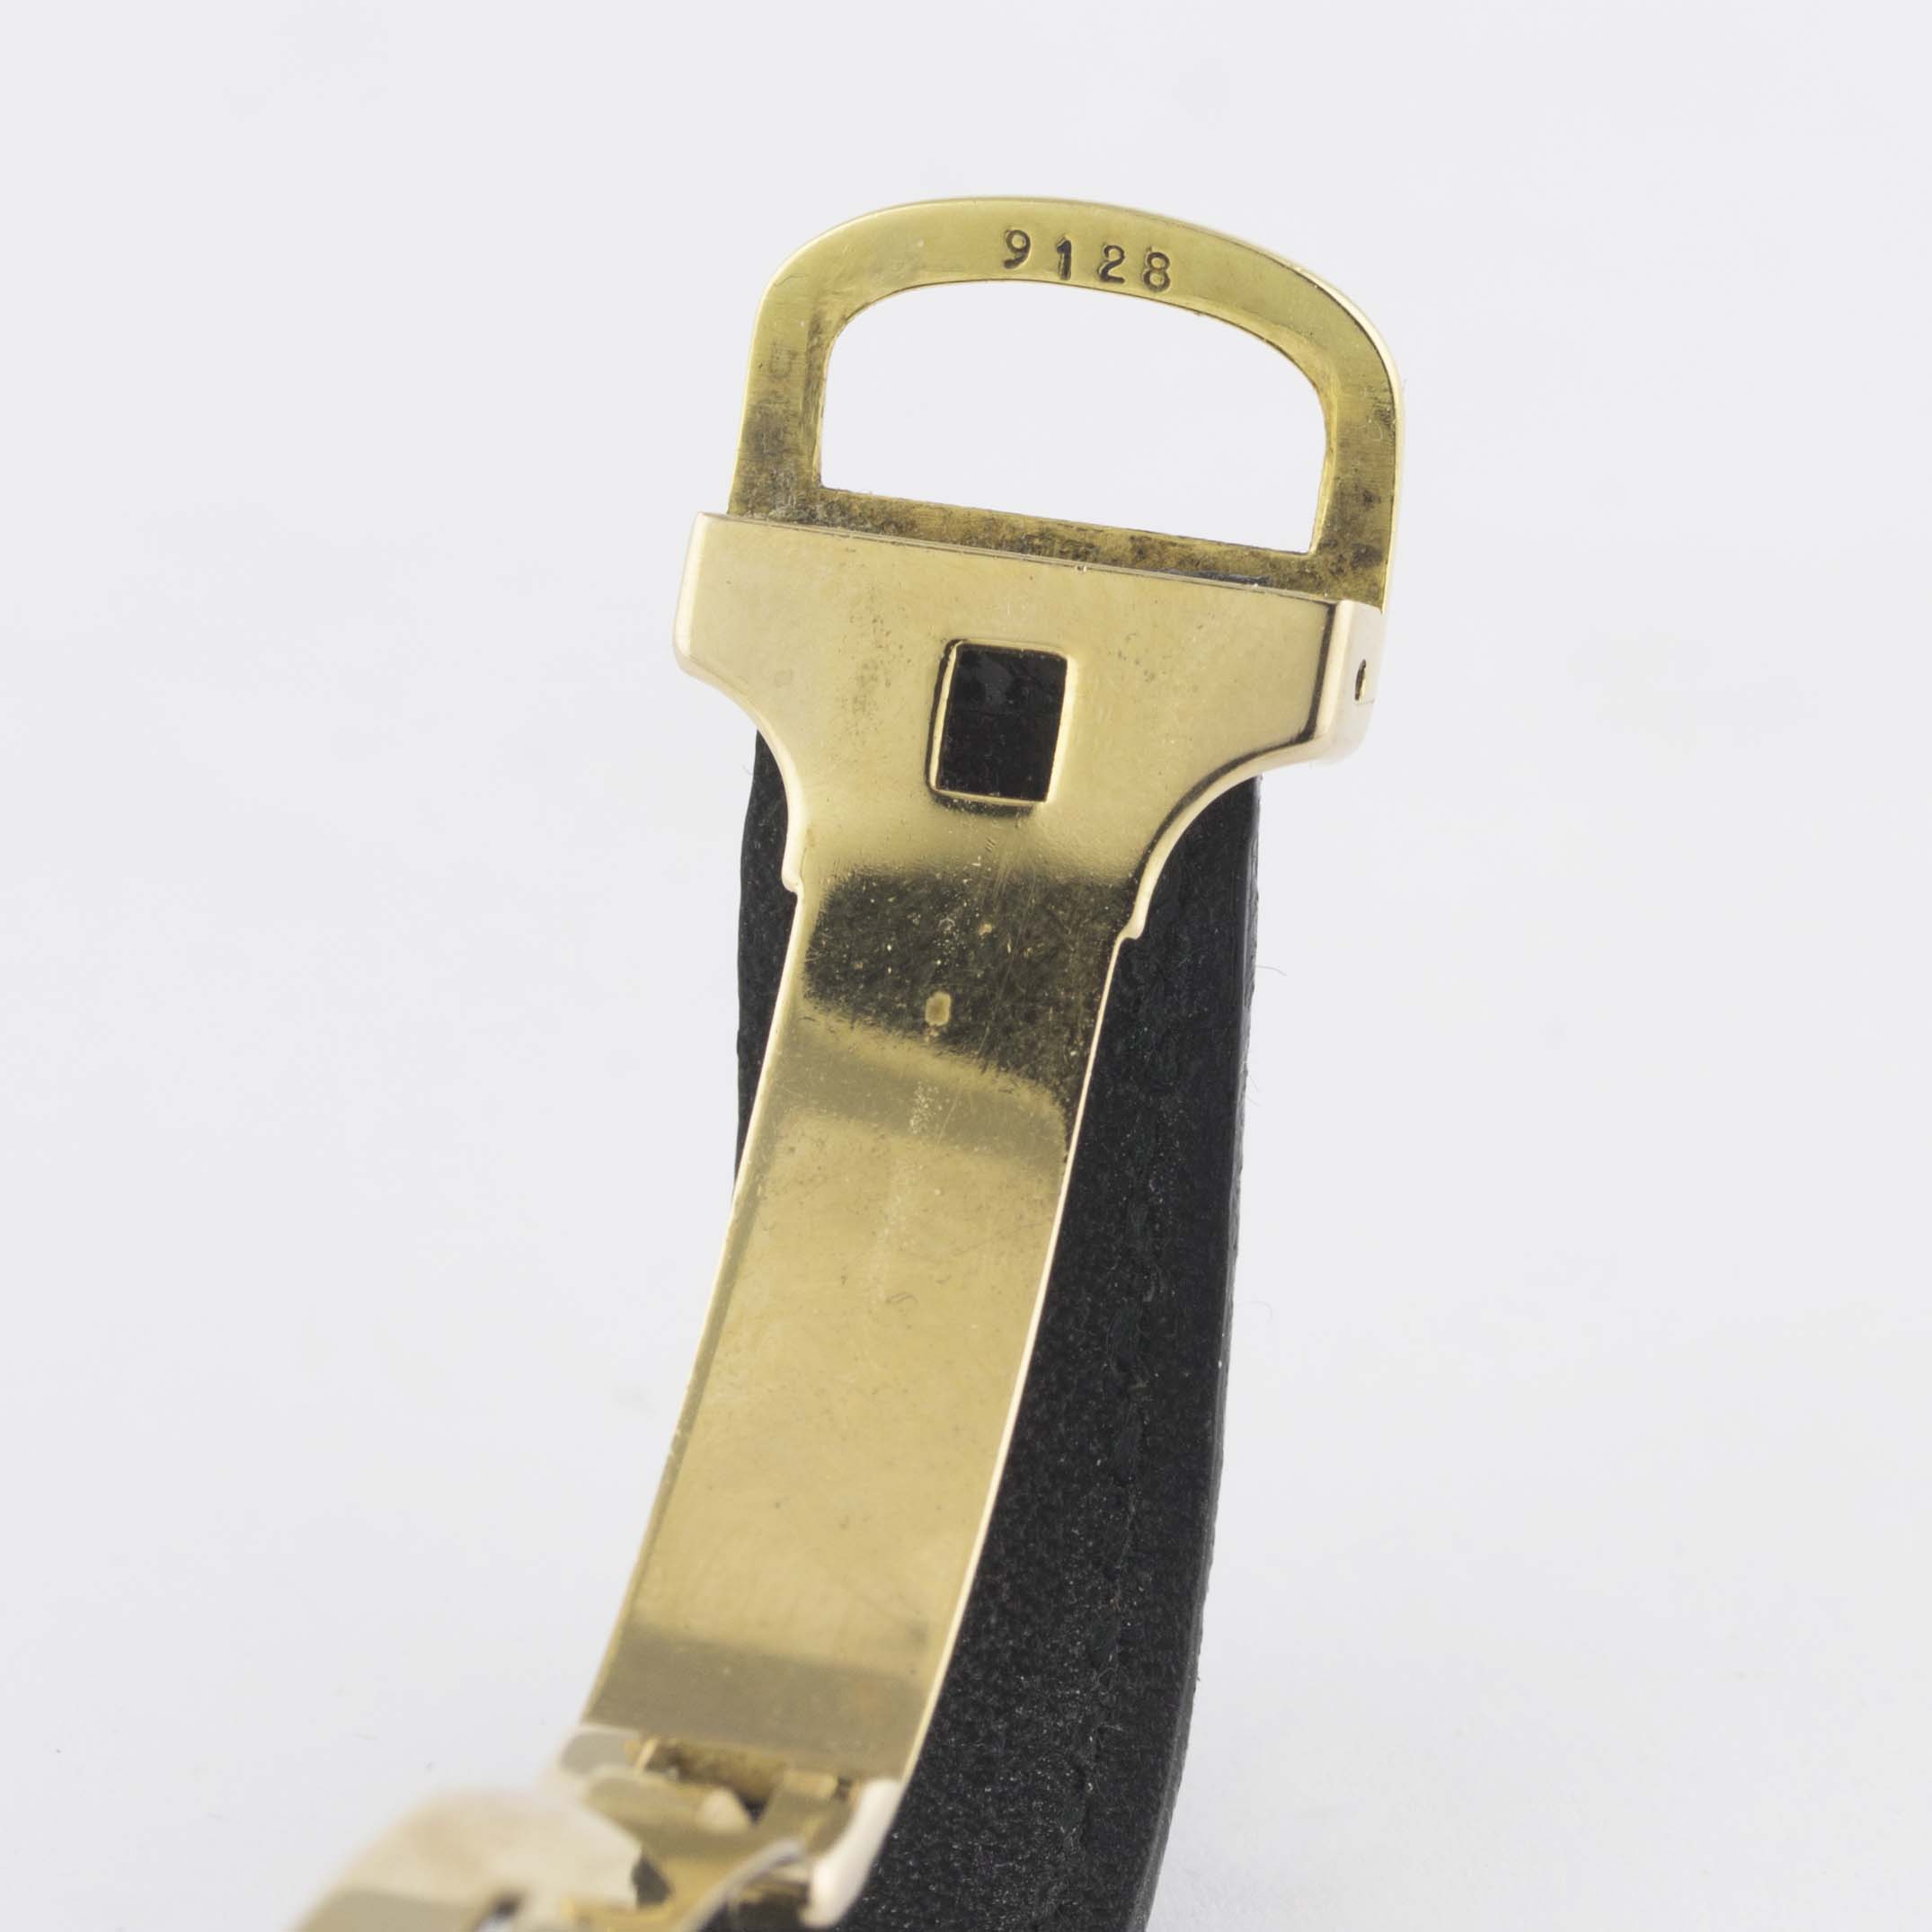 A VERY RARE 18K SOLID GOLD CARTIER LONDON TANK RECTANGULAR WRIST WATCH CIRCA 1969, WITH LONDON - Image 7 of 11